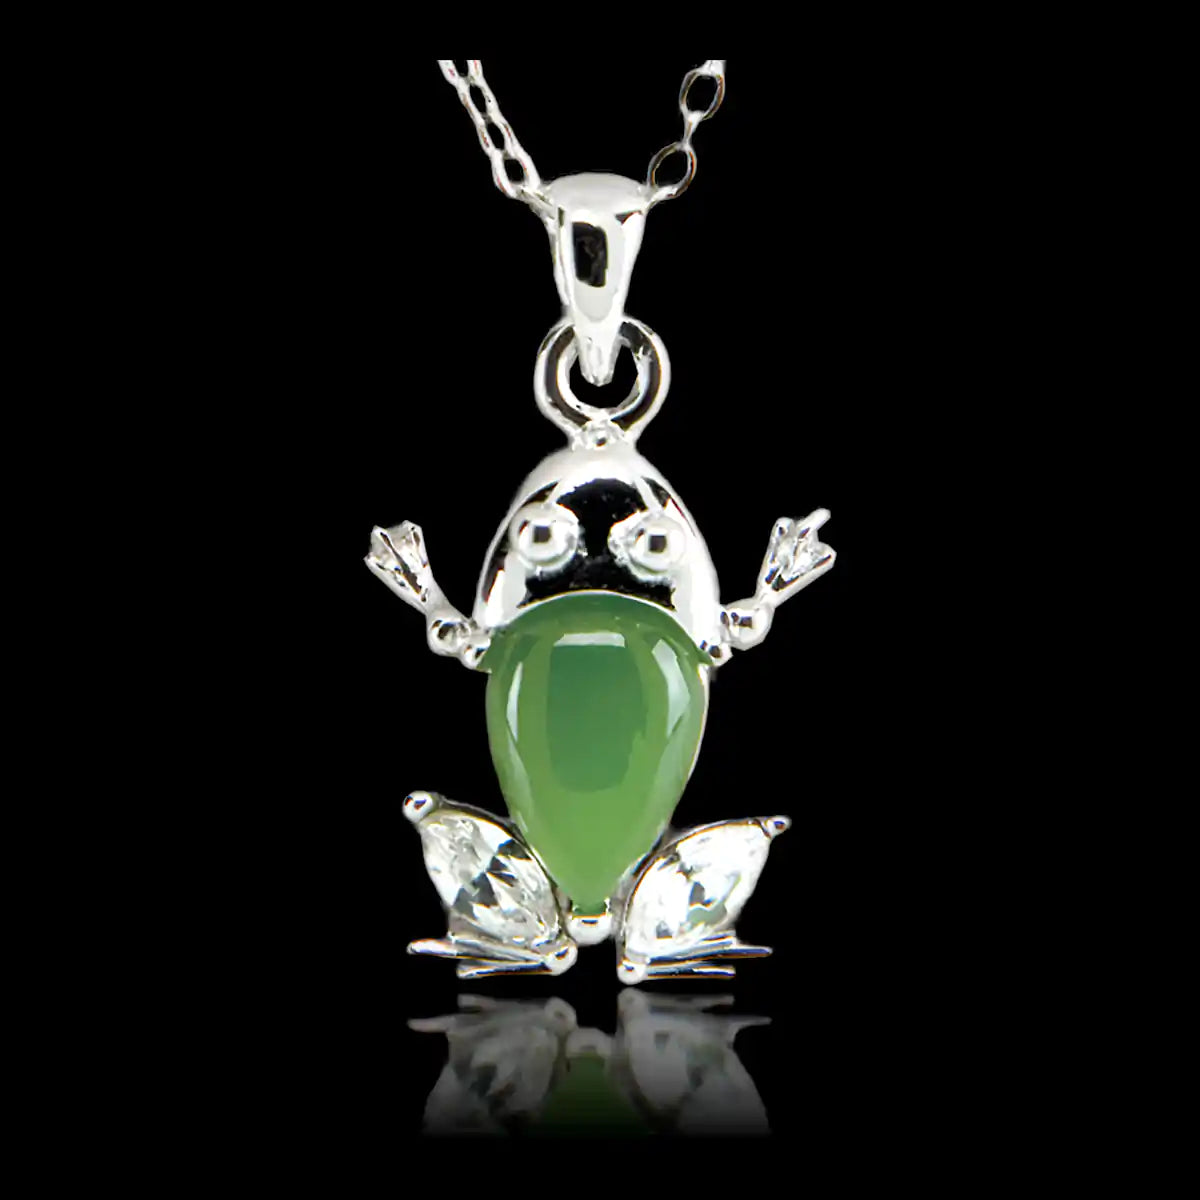 “Witchy-Poo” Frog Necklace